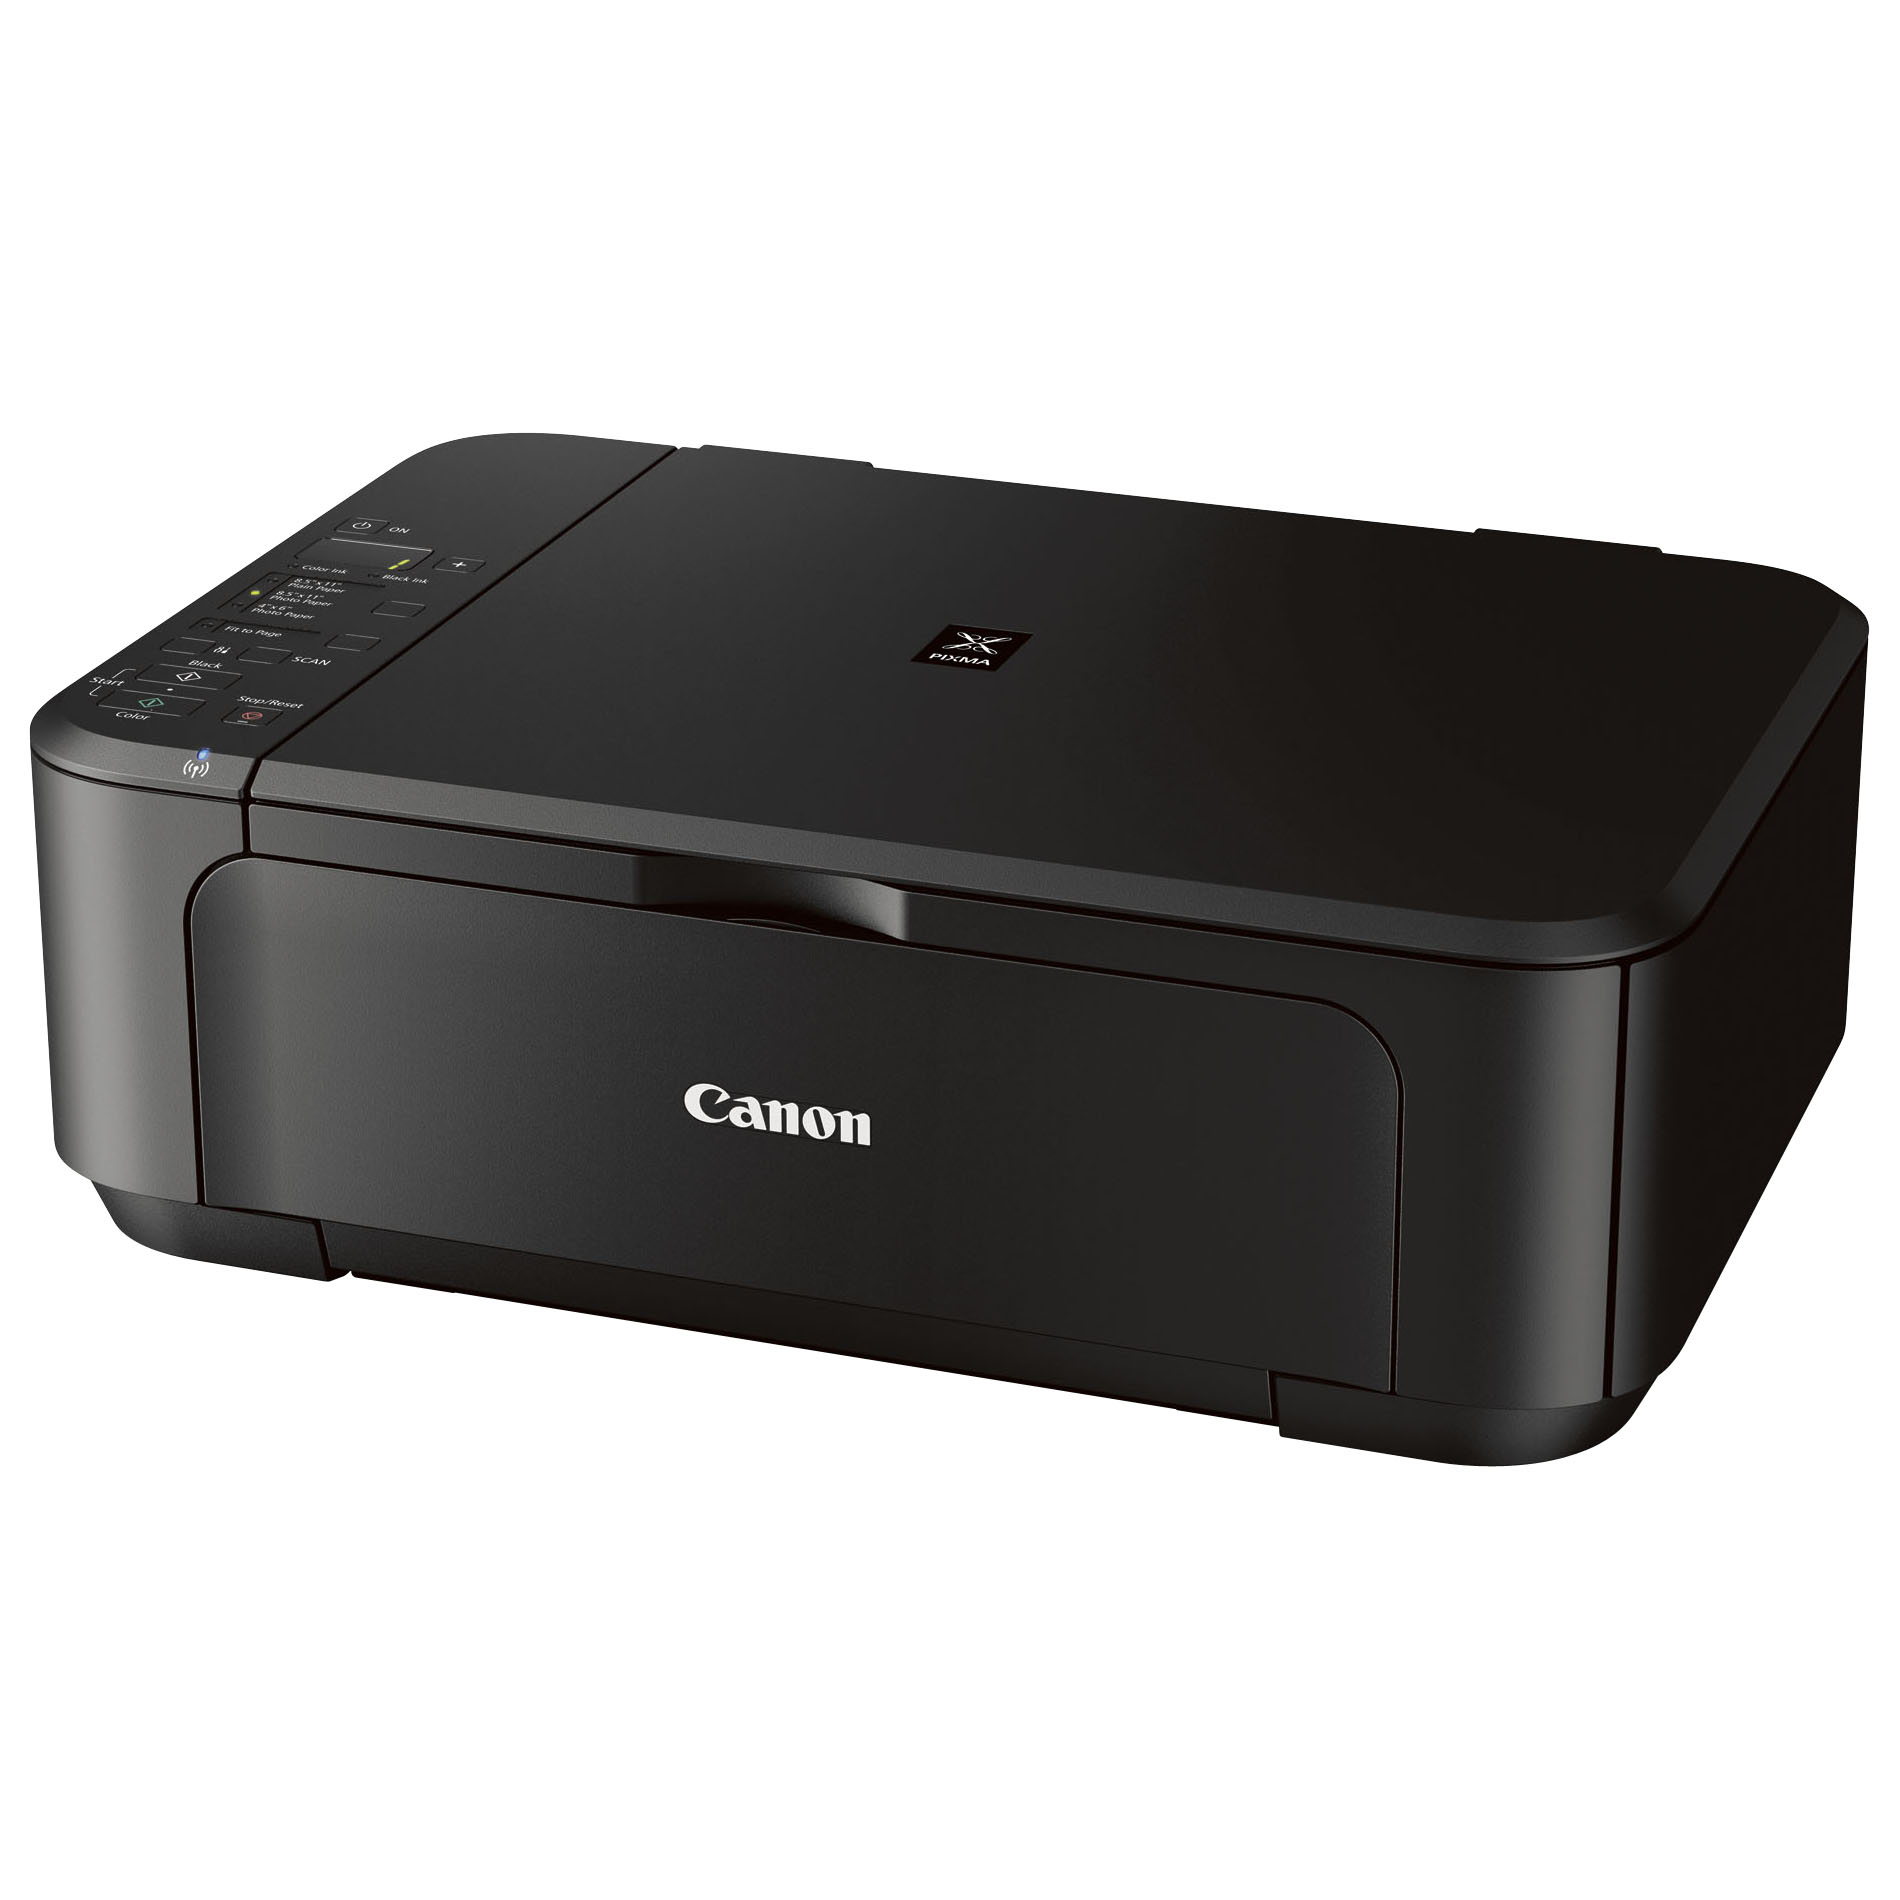 Canon PIXMA MG3222 Wireless Inkjet Photo All-In-One Printer/Copier/Scanner - image 2 of 3